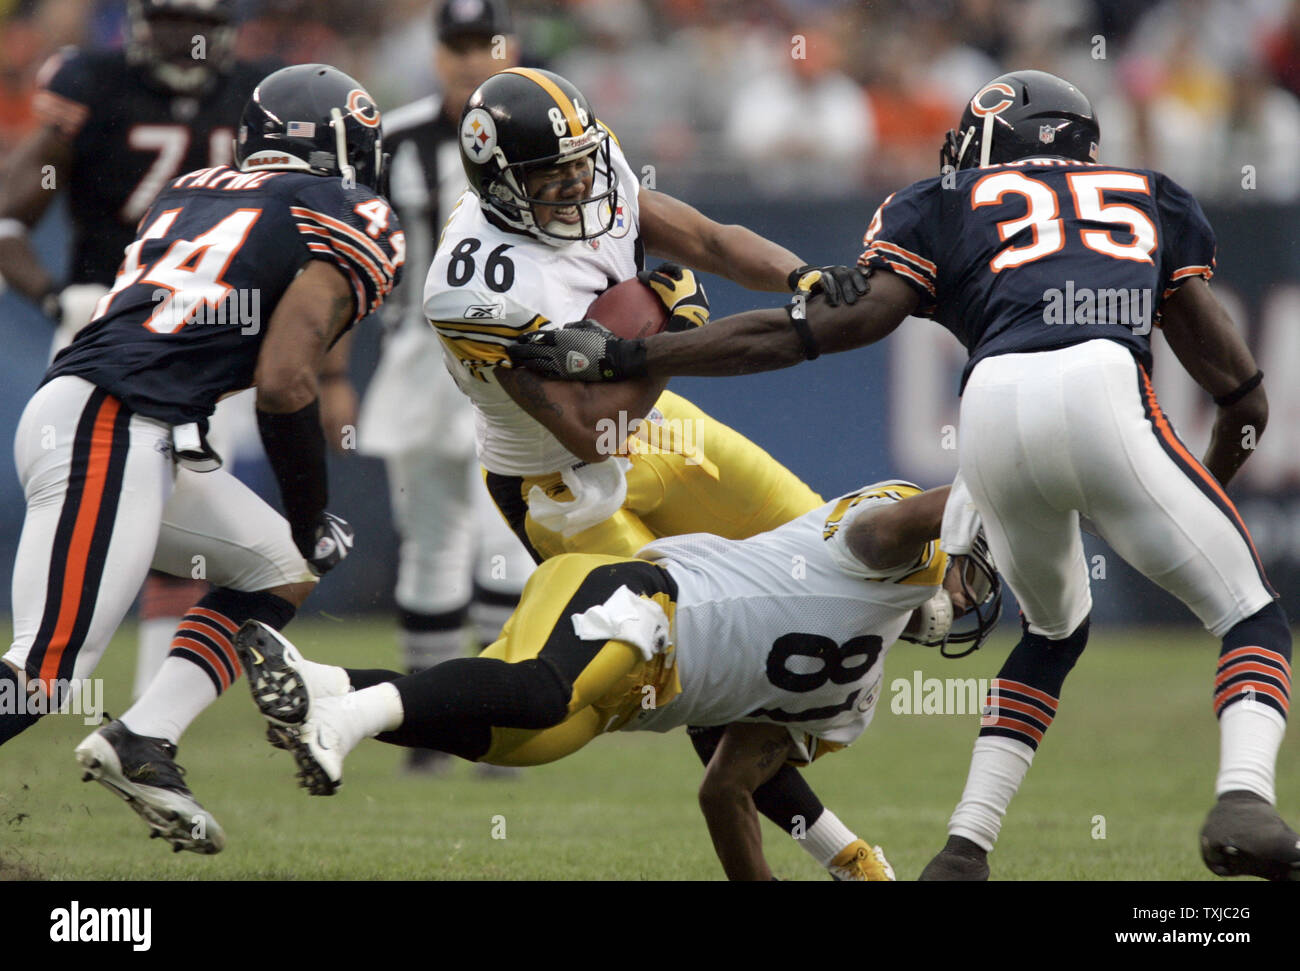 Pittsburgh Steelers wide receiver Hines Ward (86) gets a block from teammate Shaun McDonald (81) as Chicago Bears defenders Kevin Payne (44) and Zackary Bowman (35) bring him down in the second quarter at Soldier Field in Chicago on September 20, 2009. UPI /Mark Cowan Stock Photo